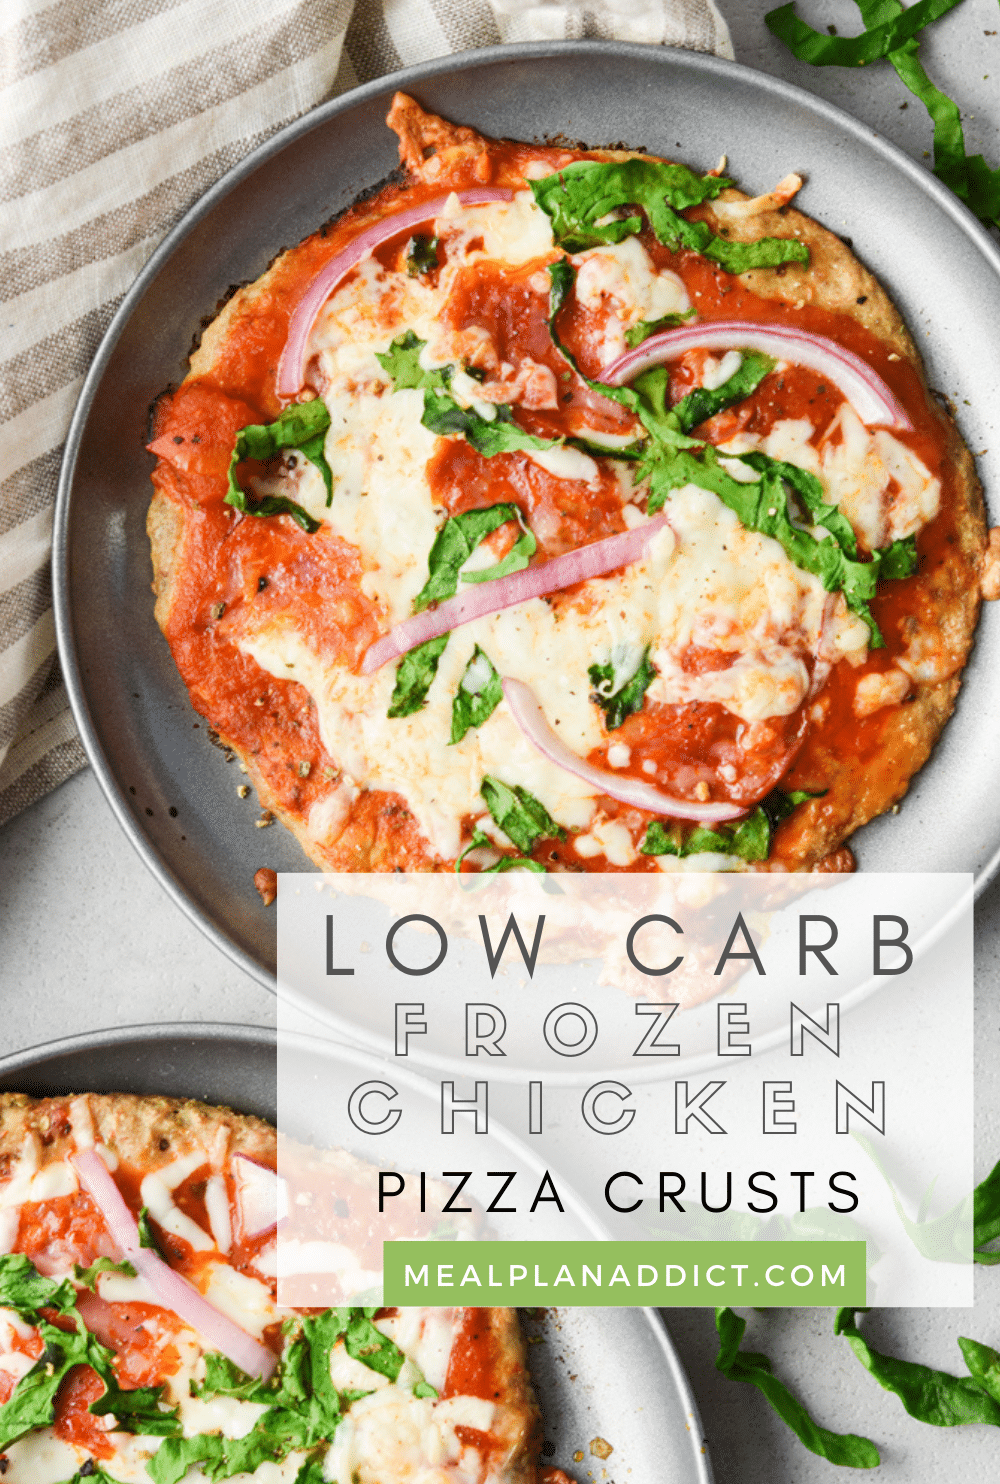 Low Carb pizza crusts pin for Pinterest